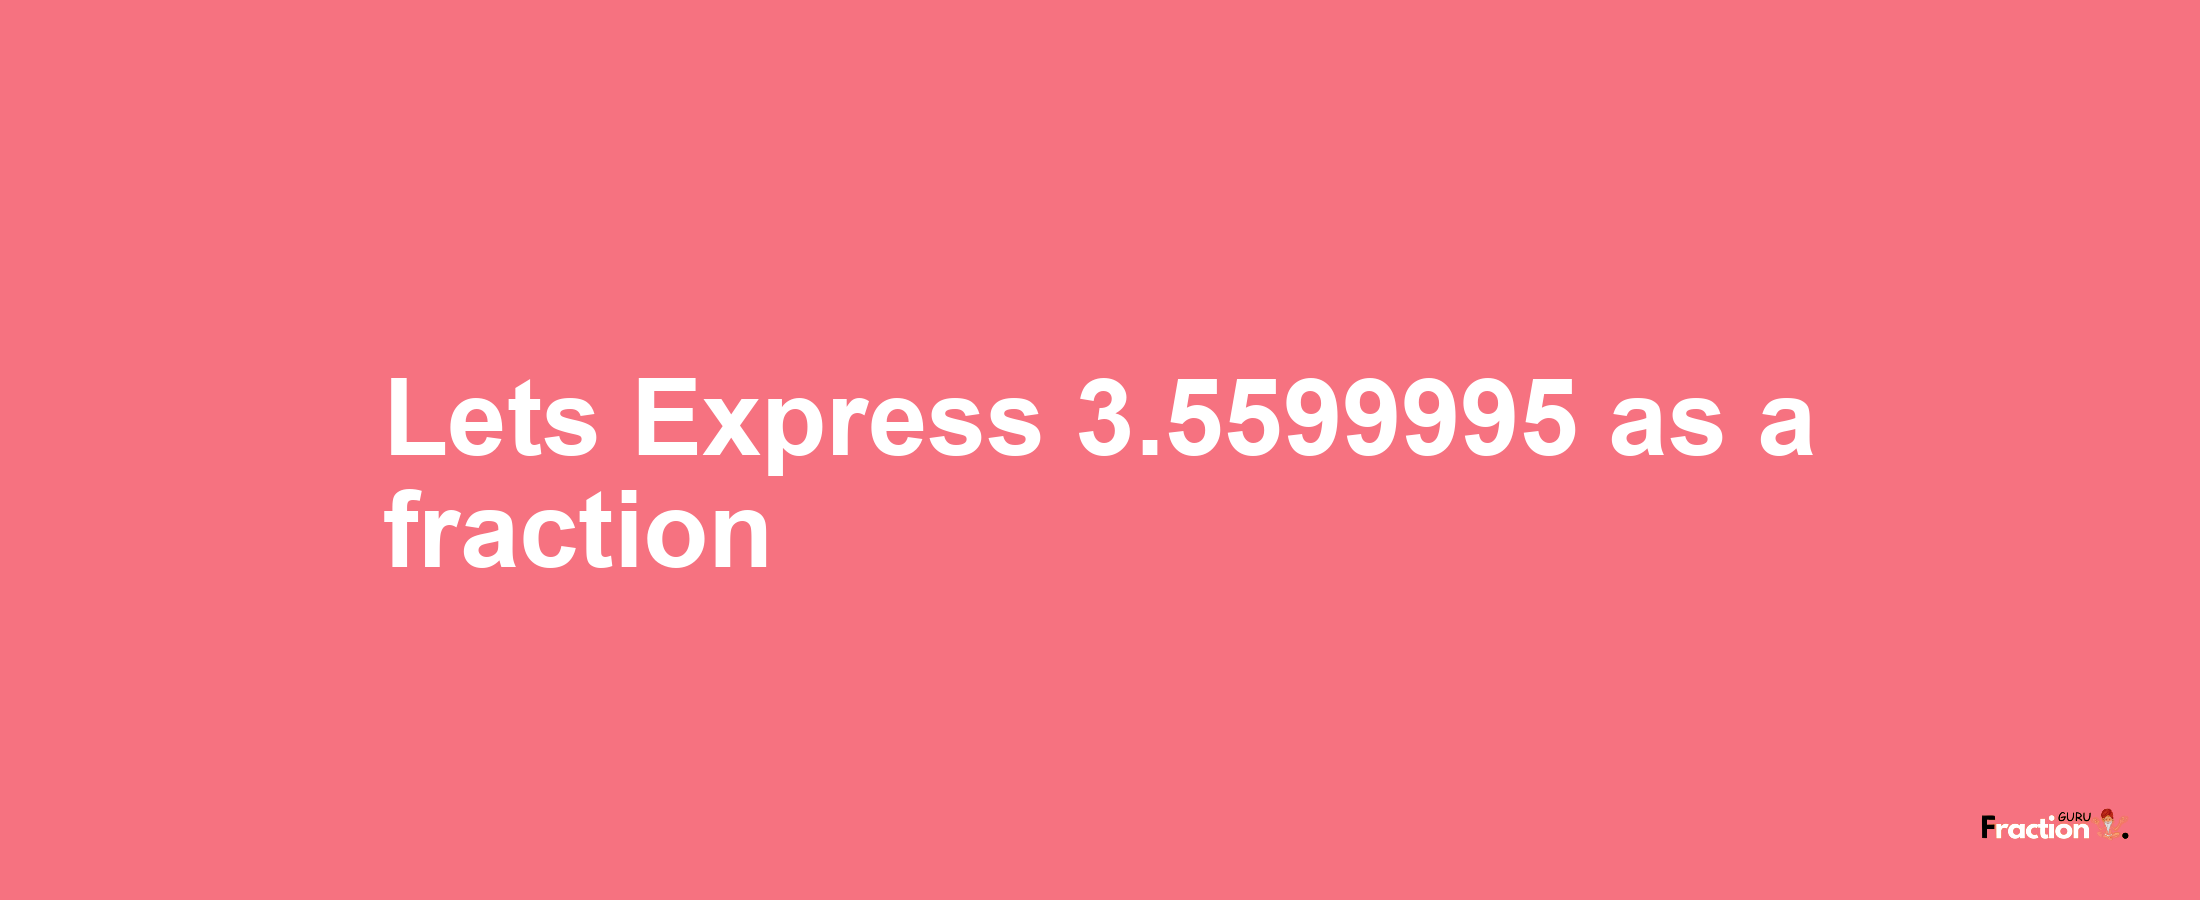 Lets Express 3.5599995 as afraction